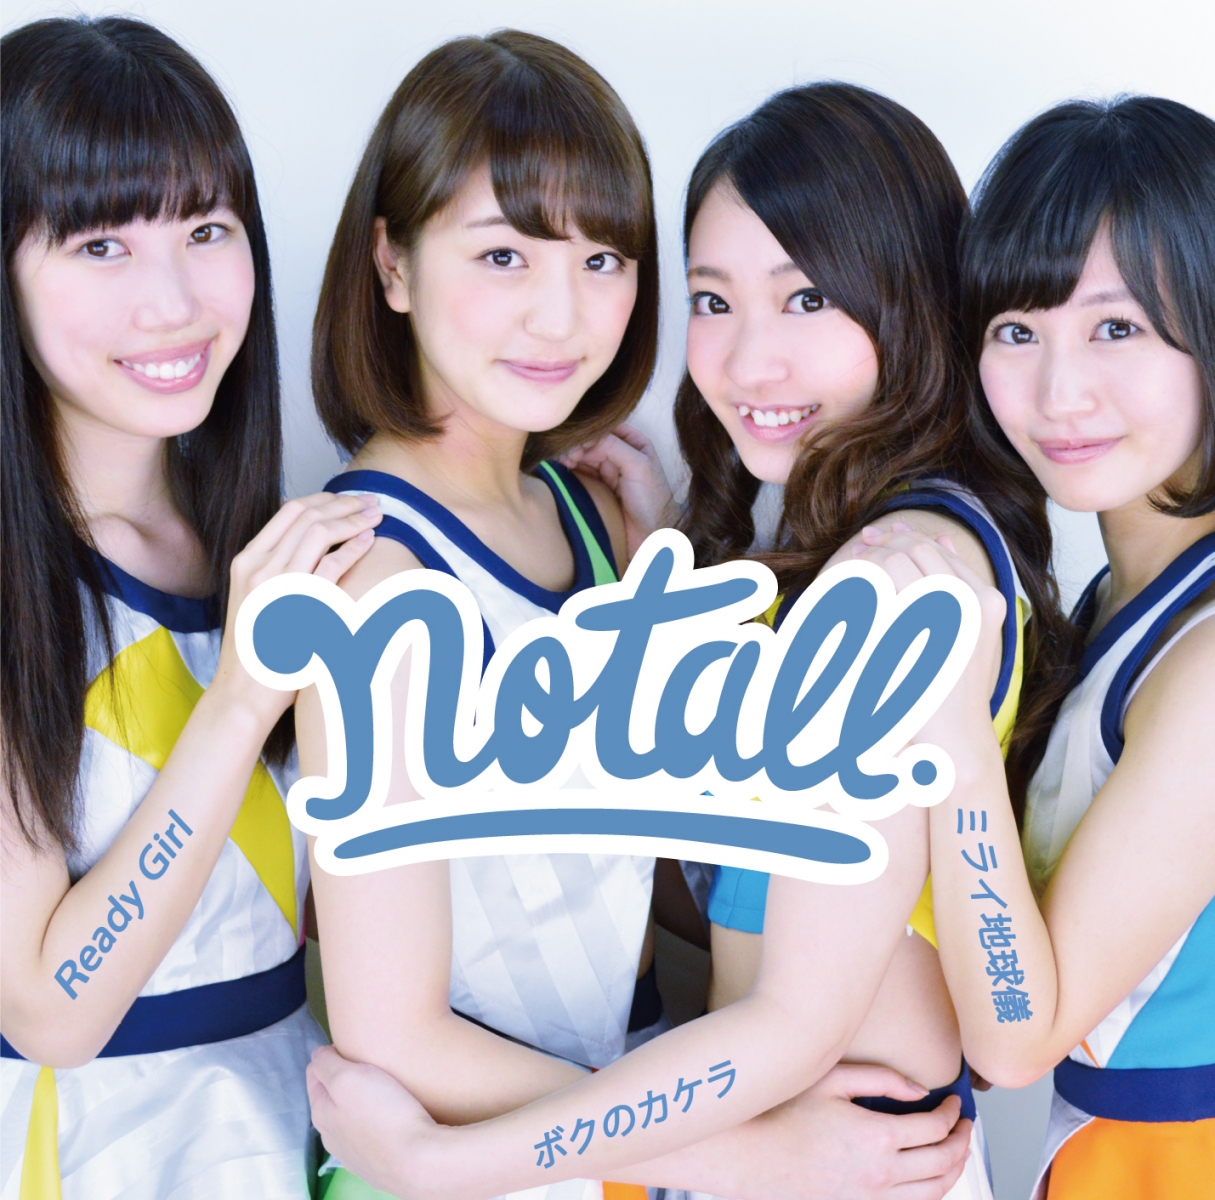 Join the Social Idol Group “notall” Project and Become a Producer!